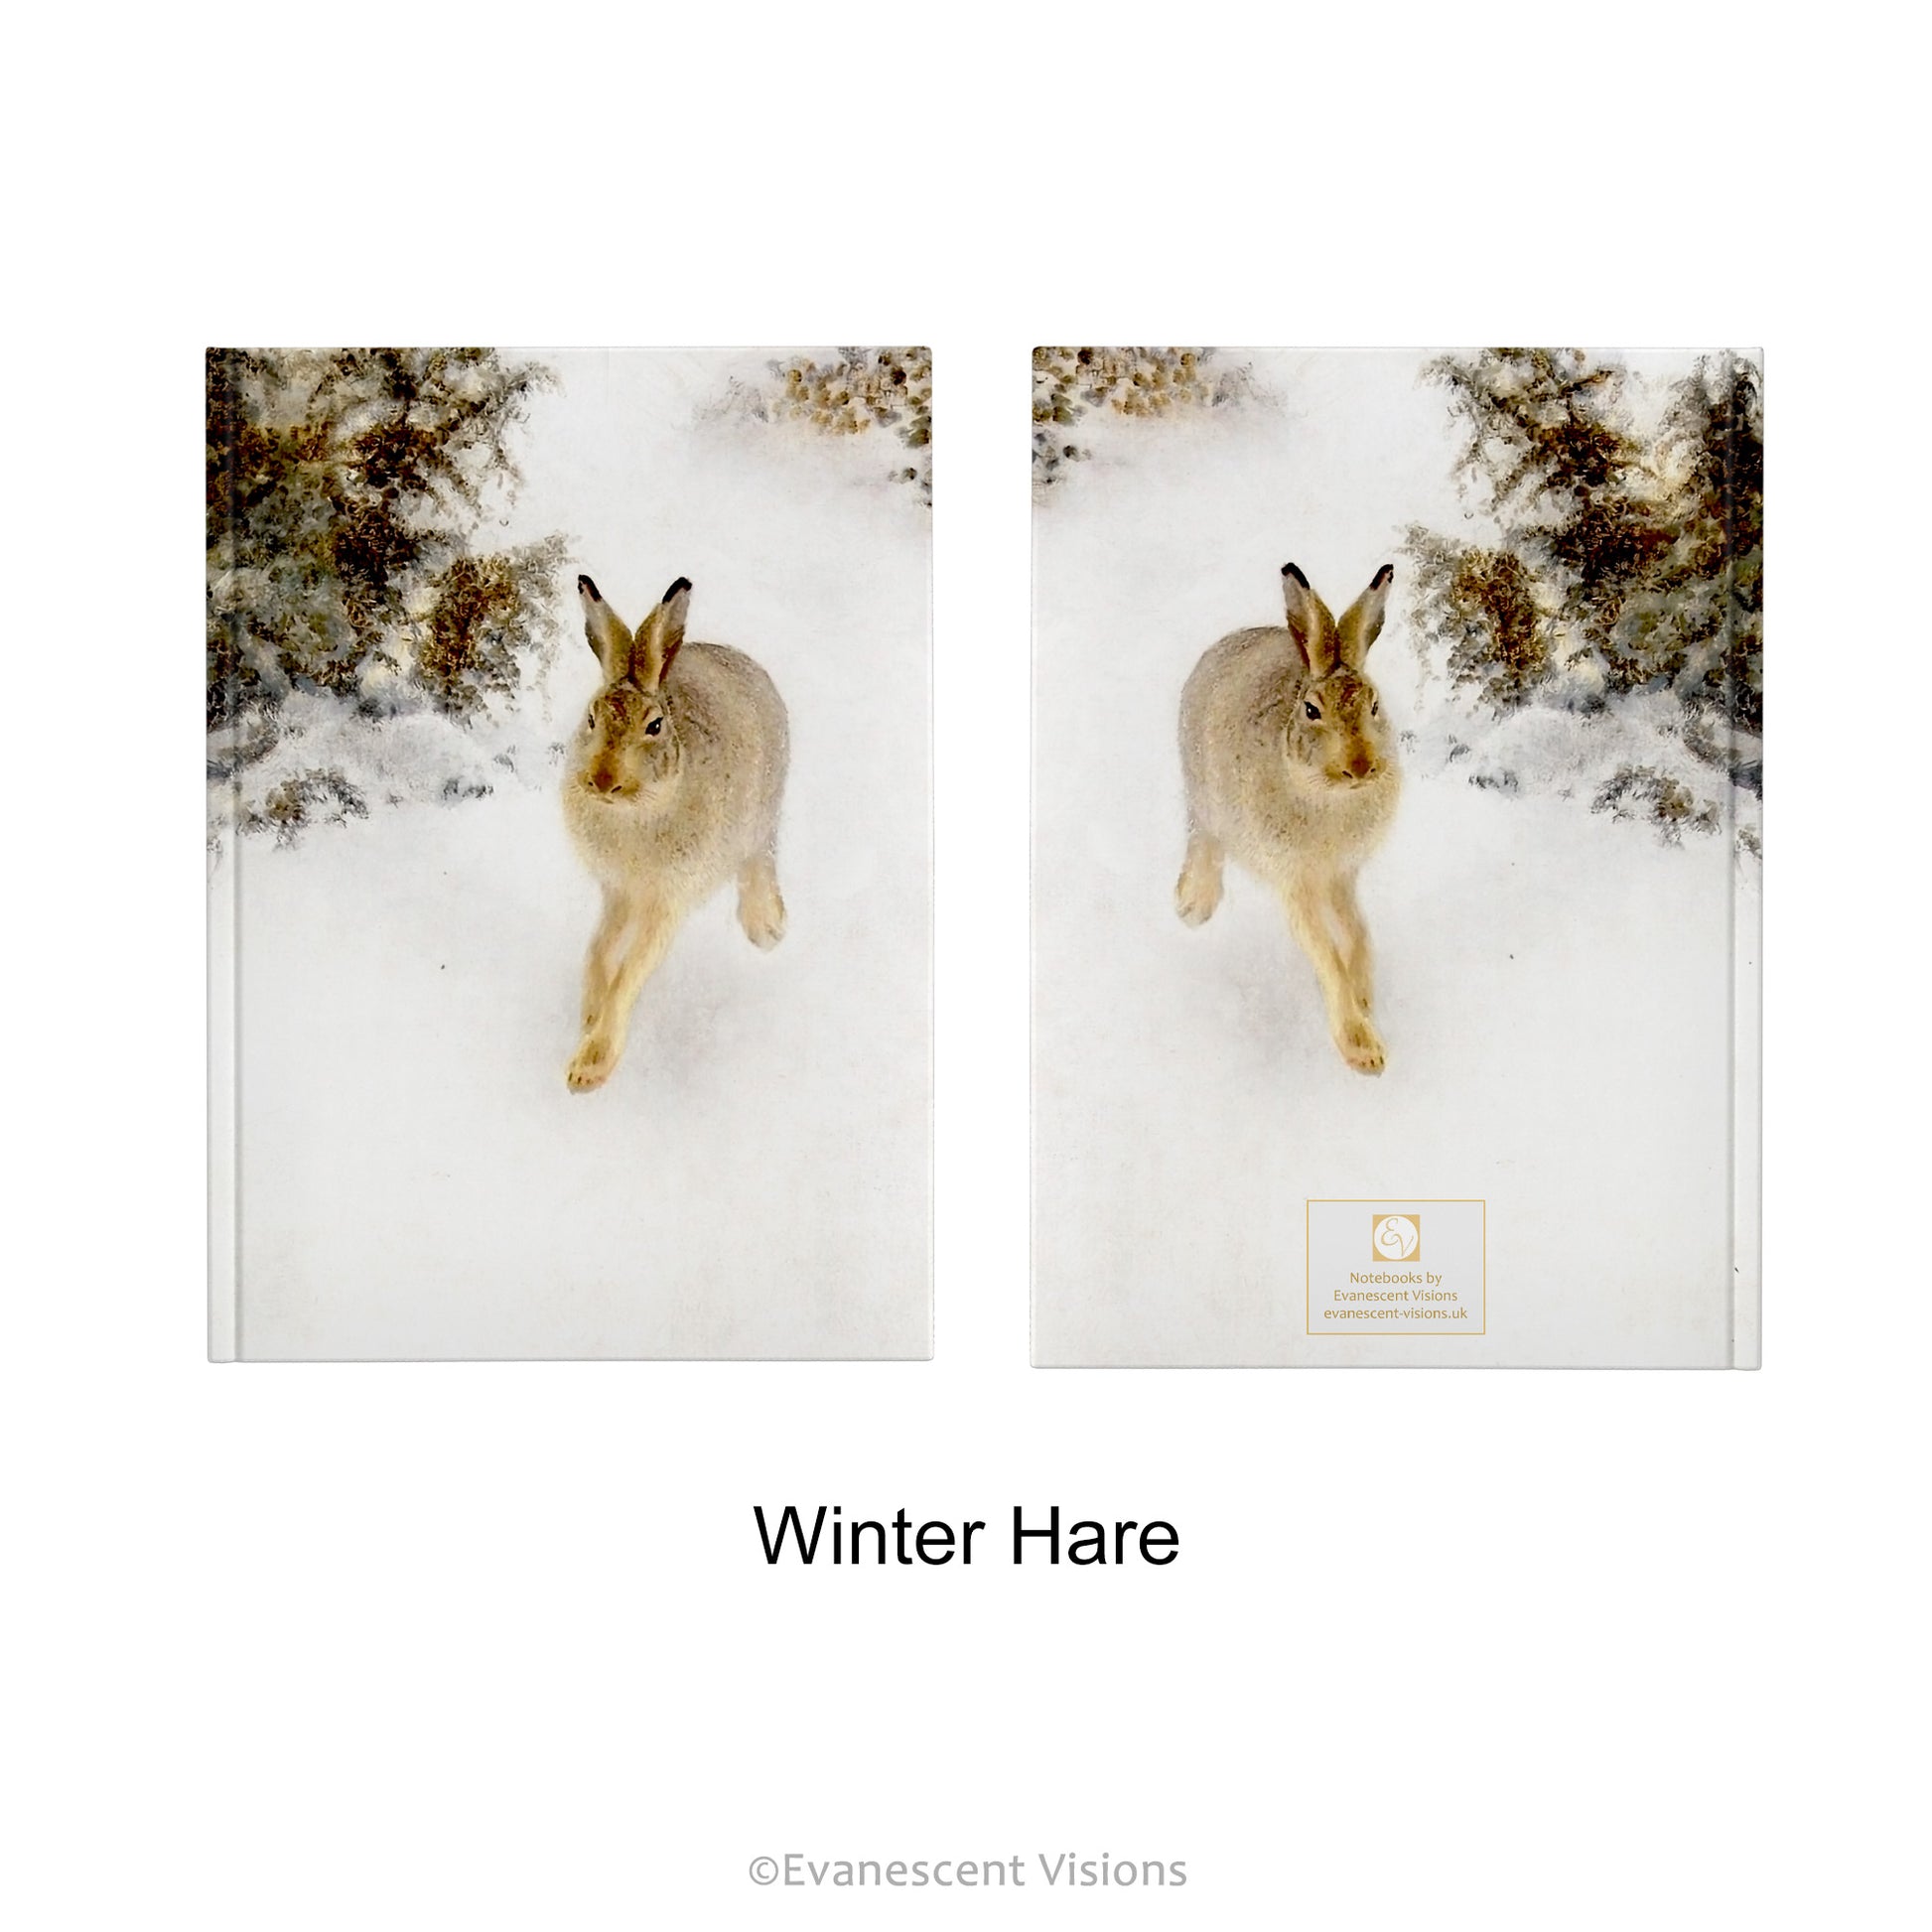 Snowy Winter Landscapes Hardcover Notebook with design option 'Winter Hare'.